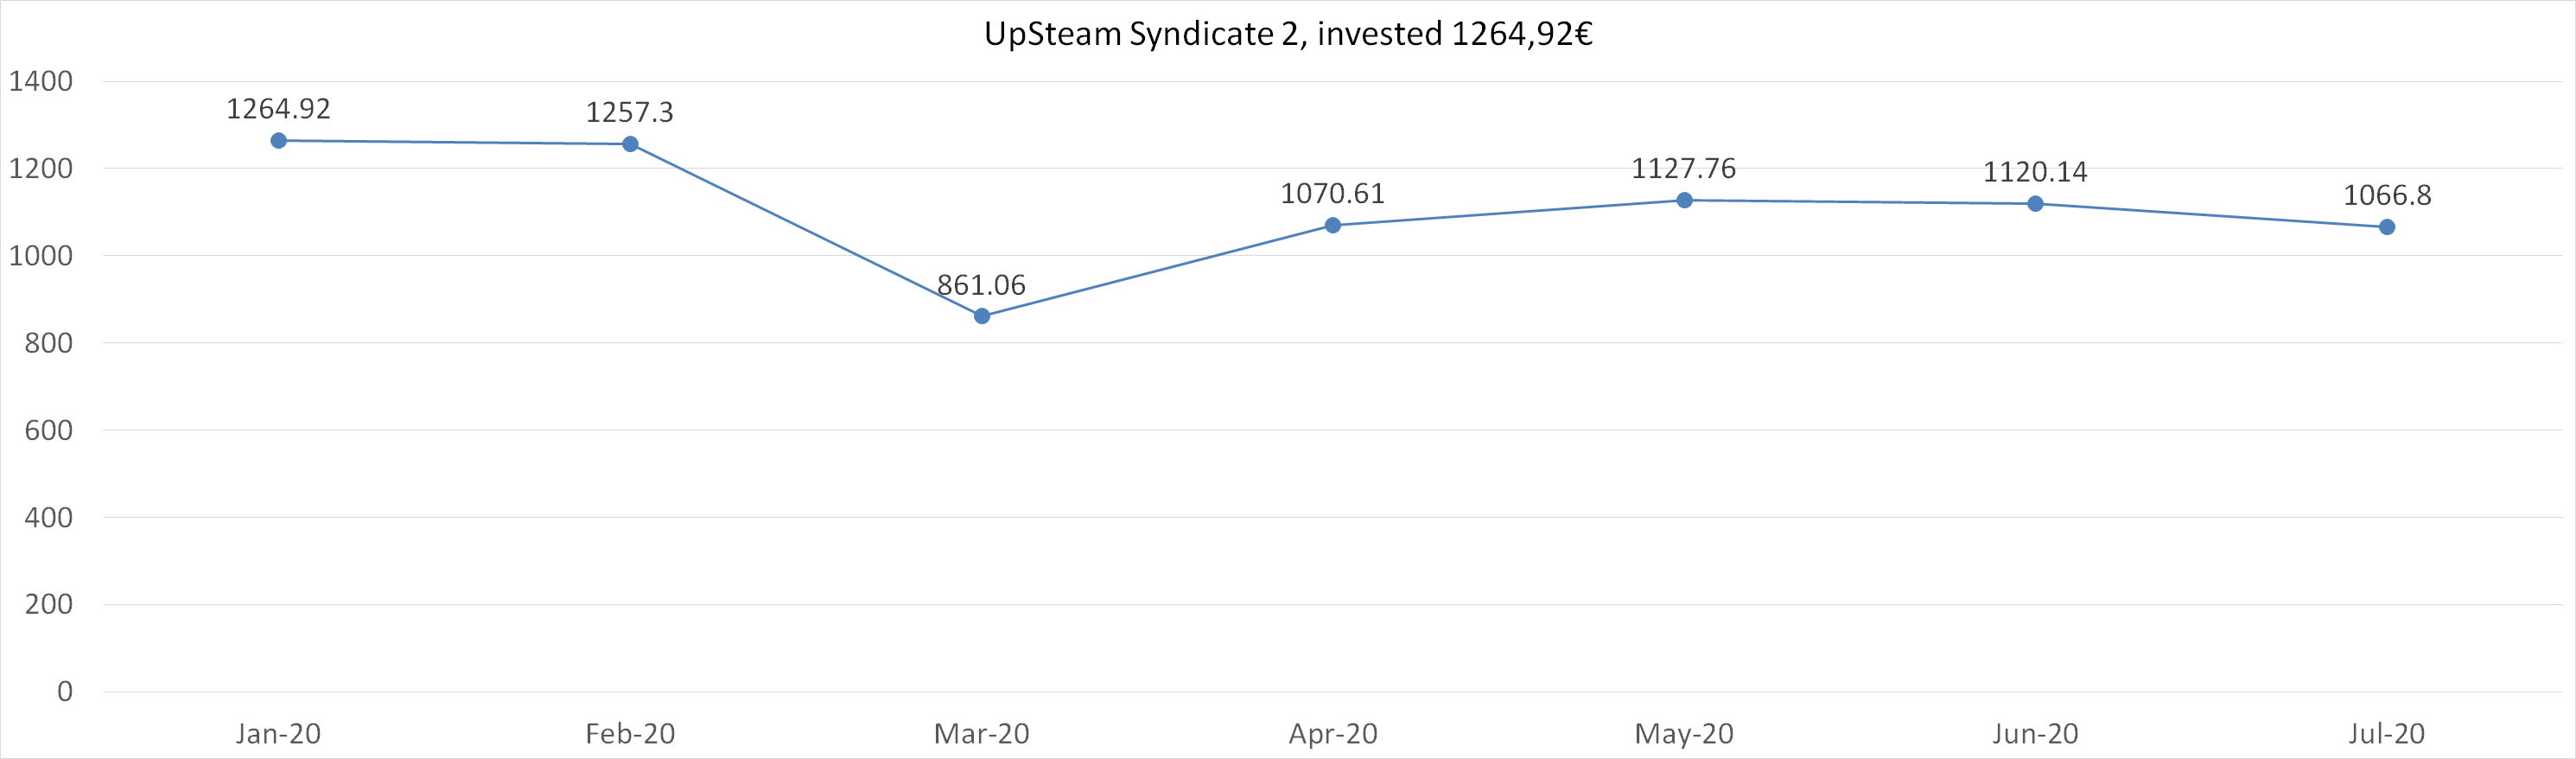 UpSteam syndicate 2, invested 1264,92 euros july 2020